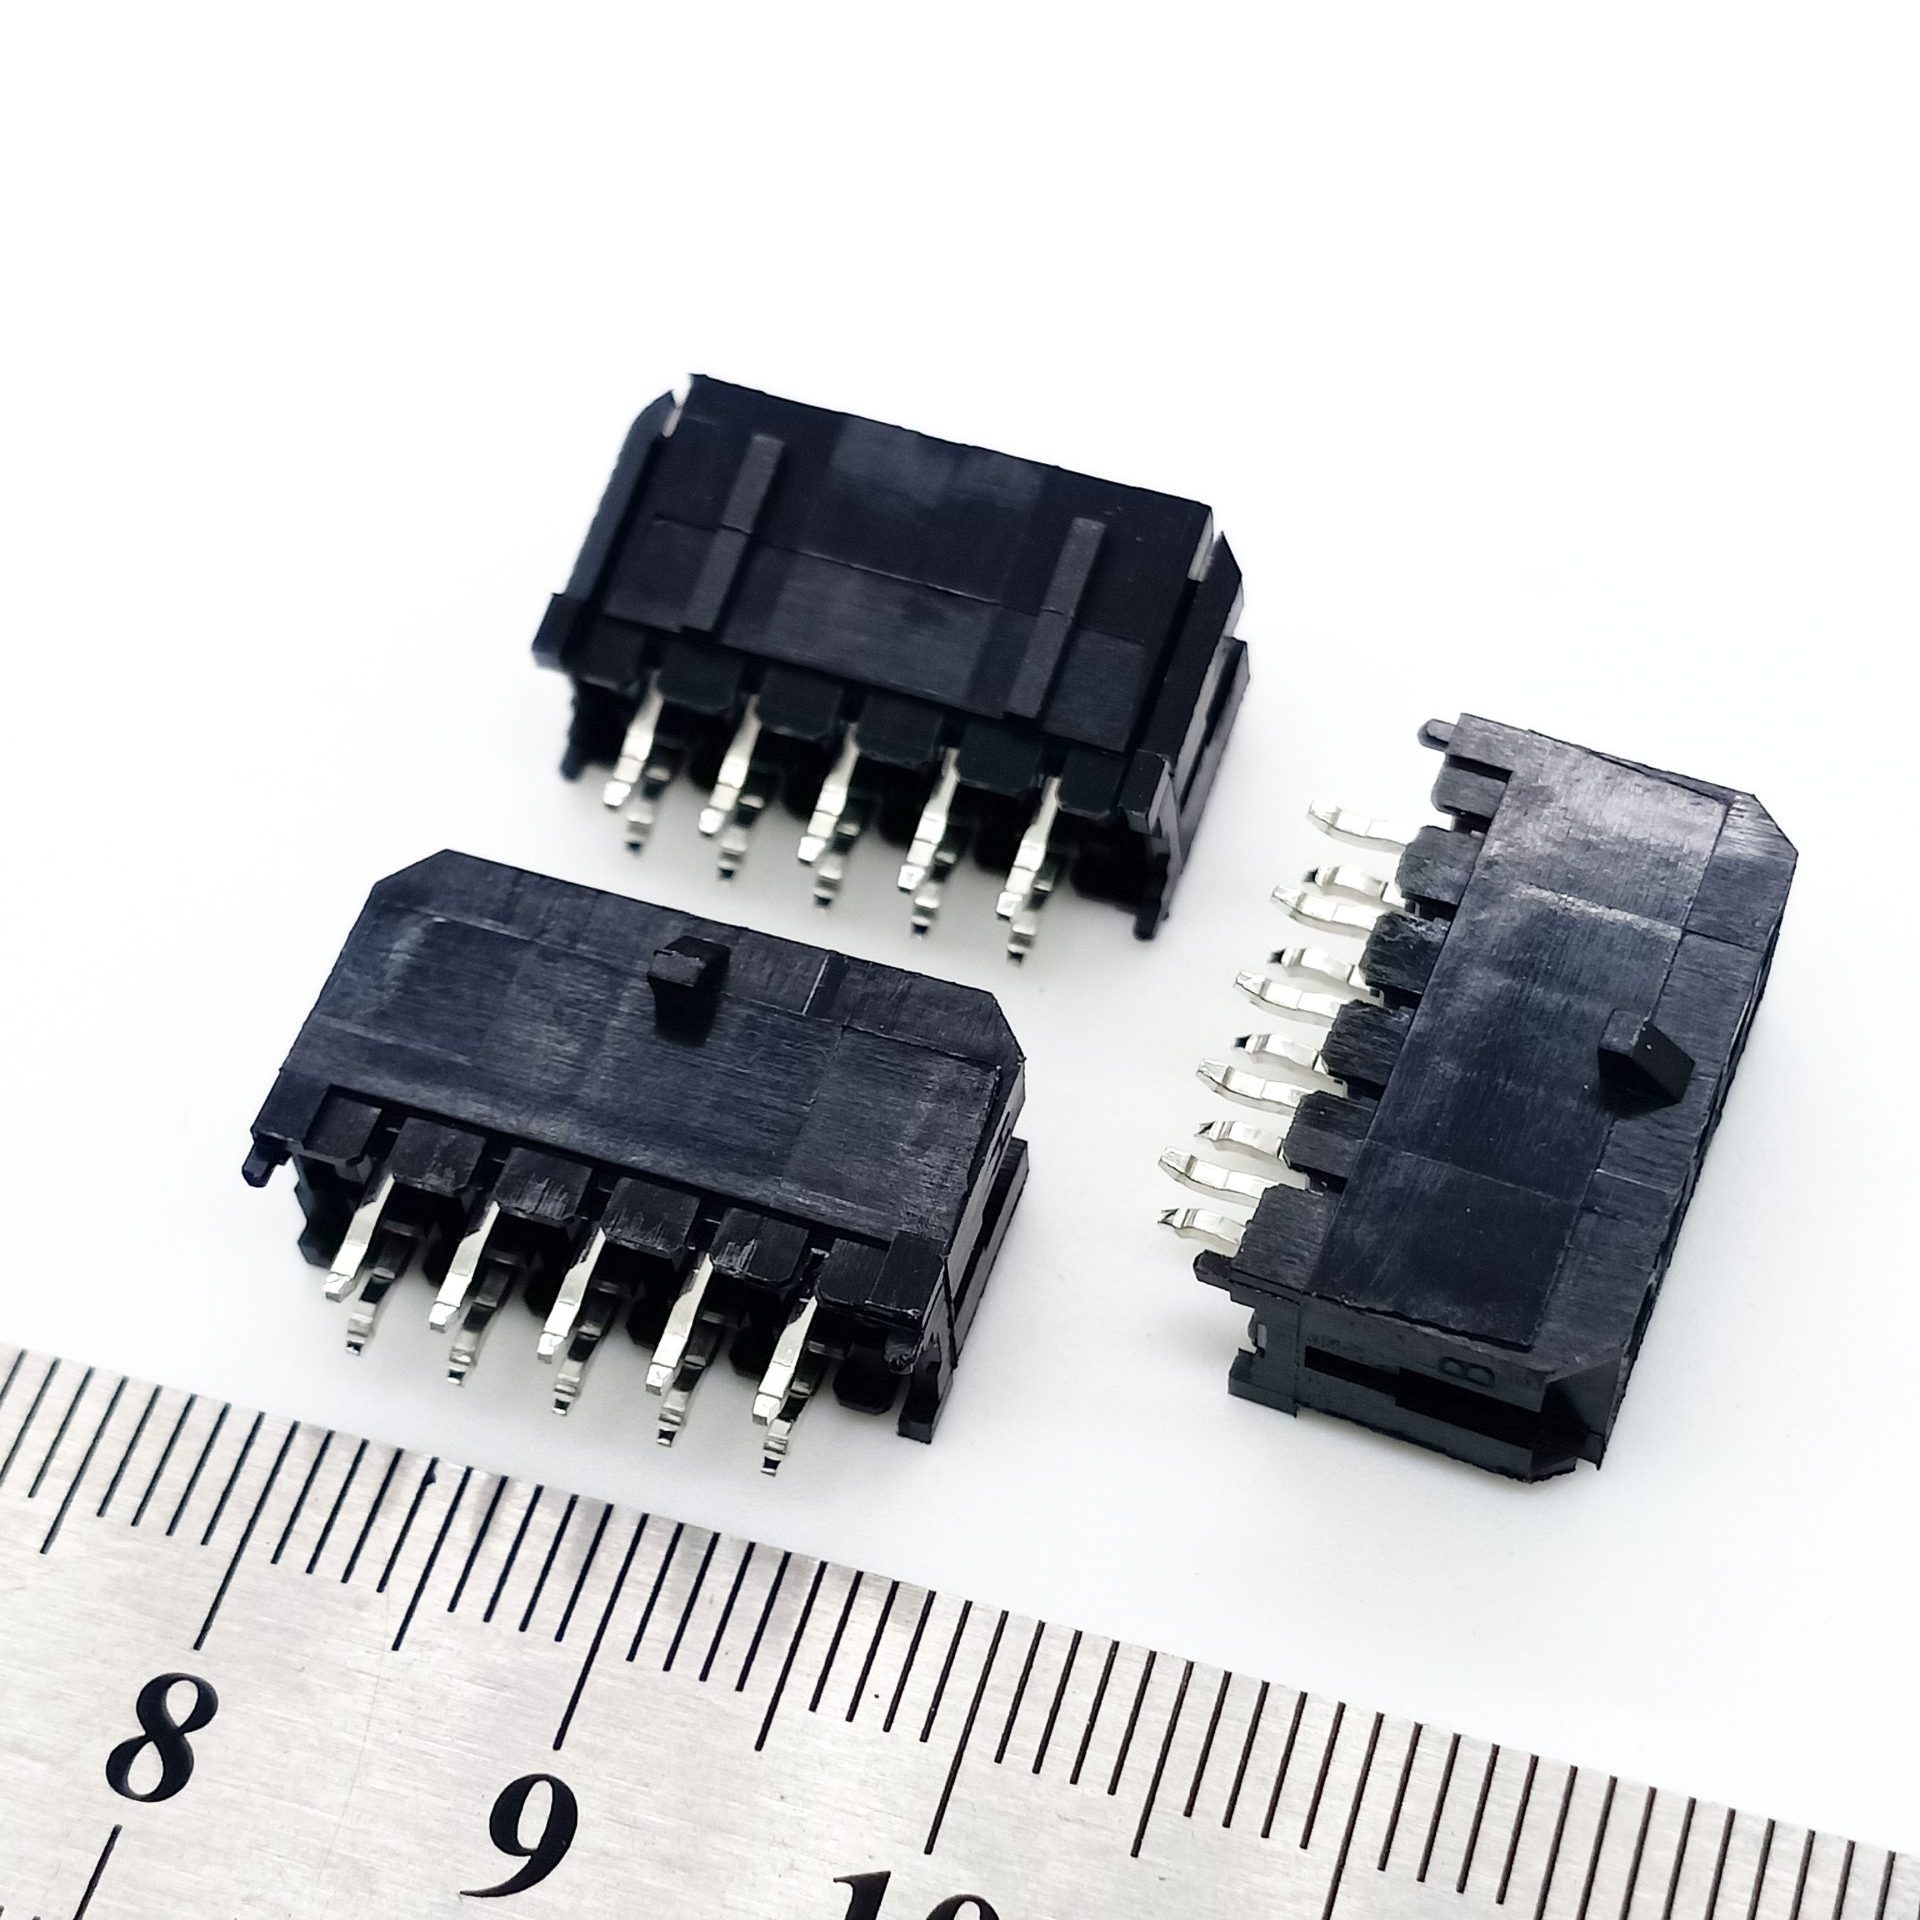 3.0mm pitch double row 10pin Wire to Board Connector for Micro-Fit 3.0 44067 0440671001 440671001